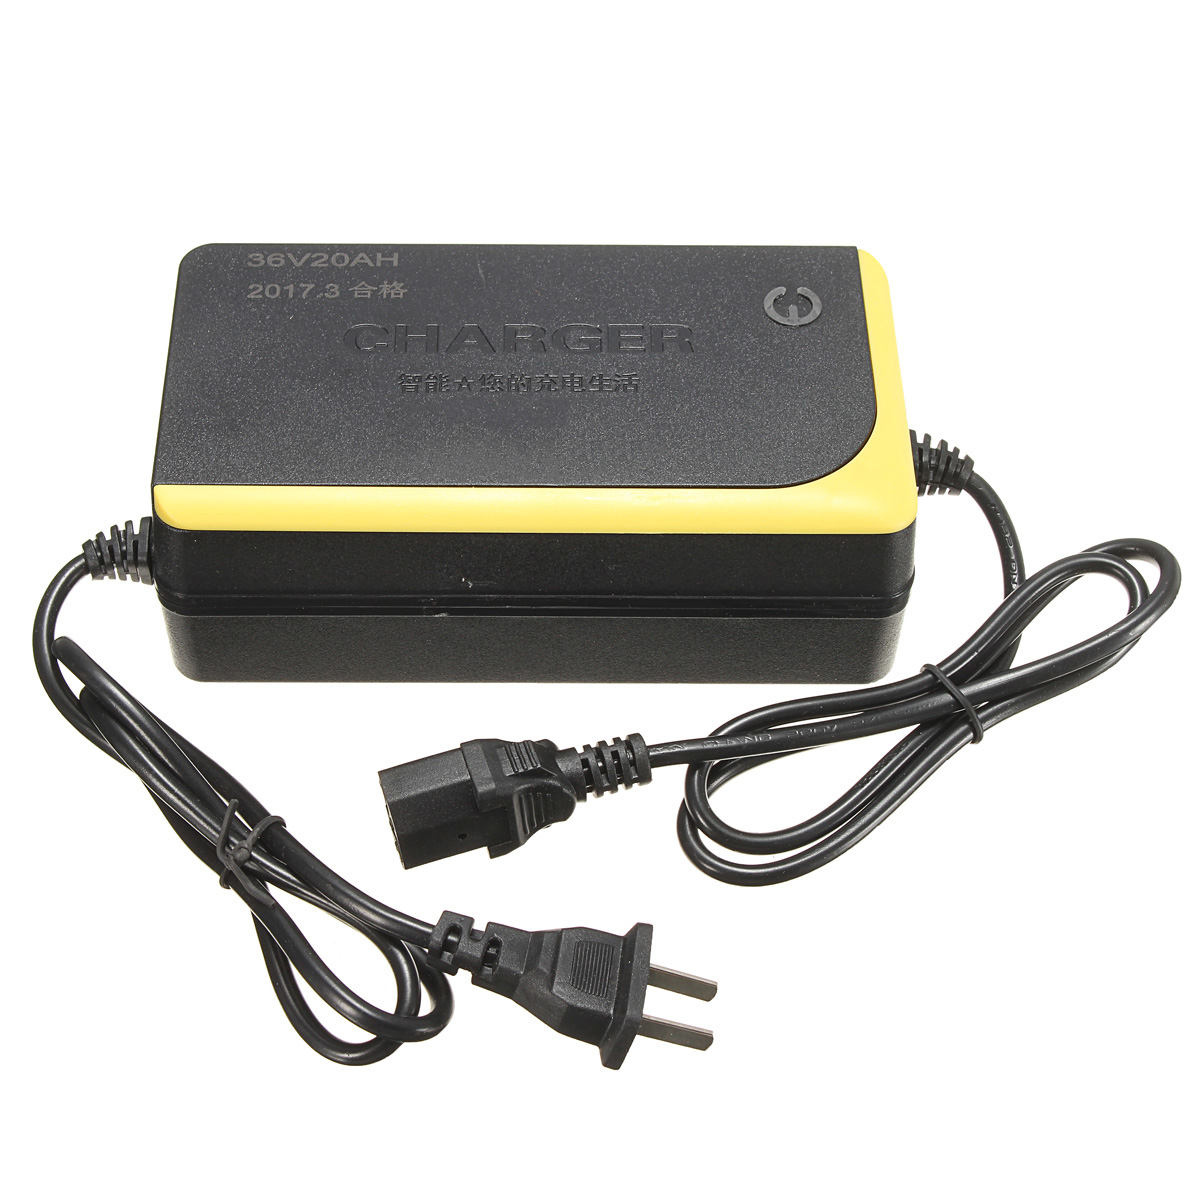 36V 20AH Intelligent Charger for Electric Scooter Bike Capable Lead Acid Battery